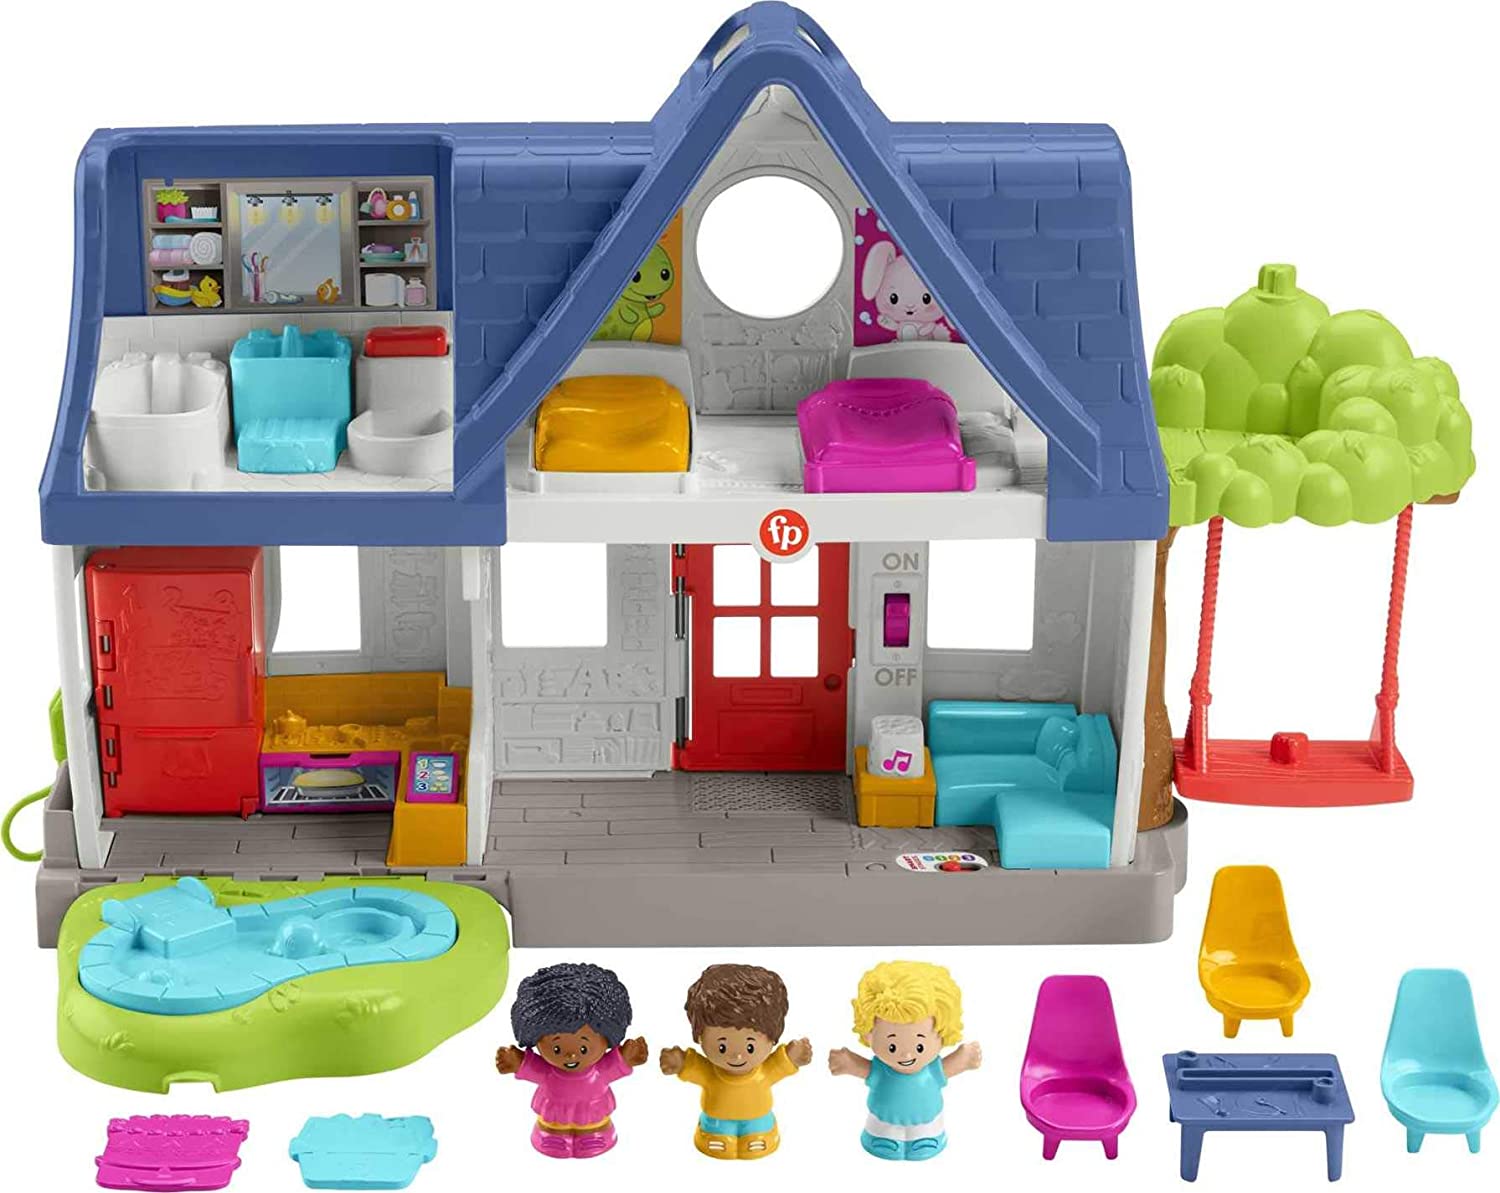  Fisher-Price Little People Toddler Learning Toy, See